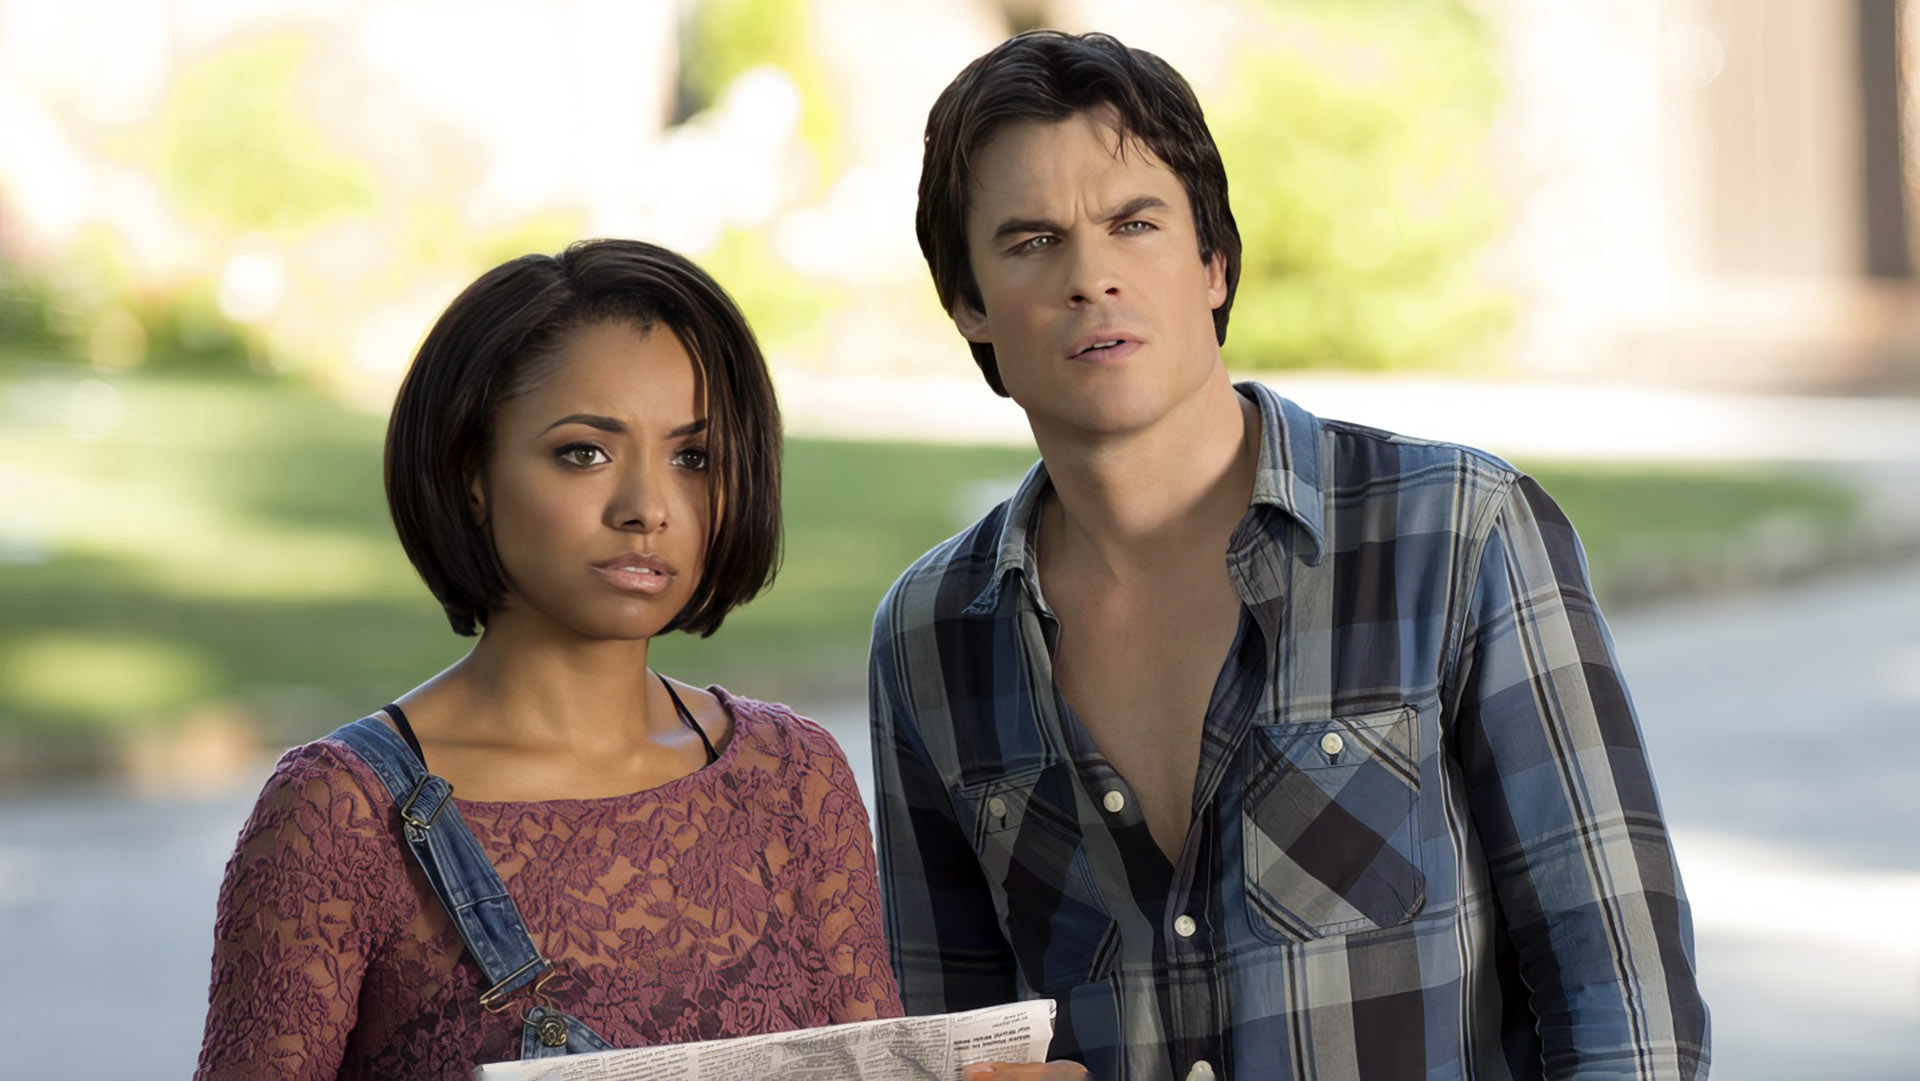 8 Vampire Diaries Episodes With the Most Shocking Cliffhangers